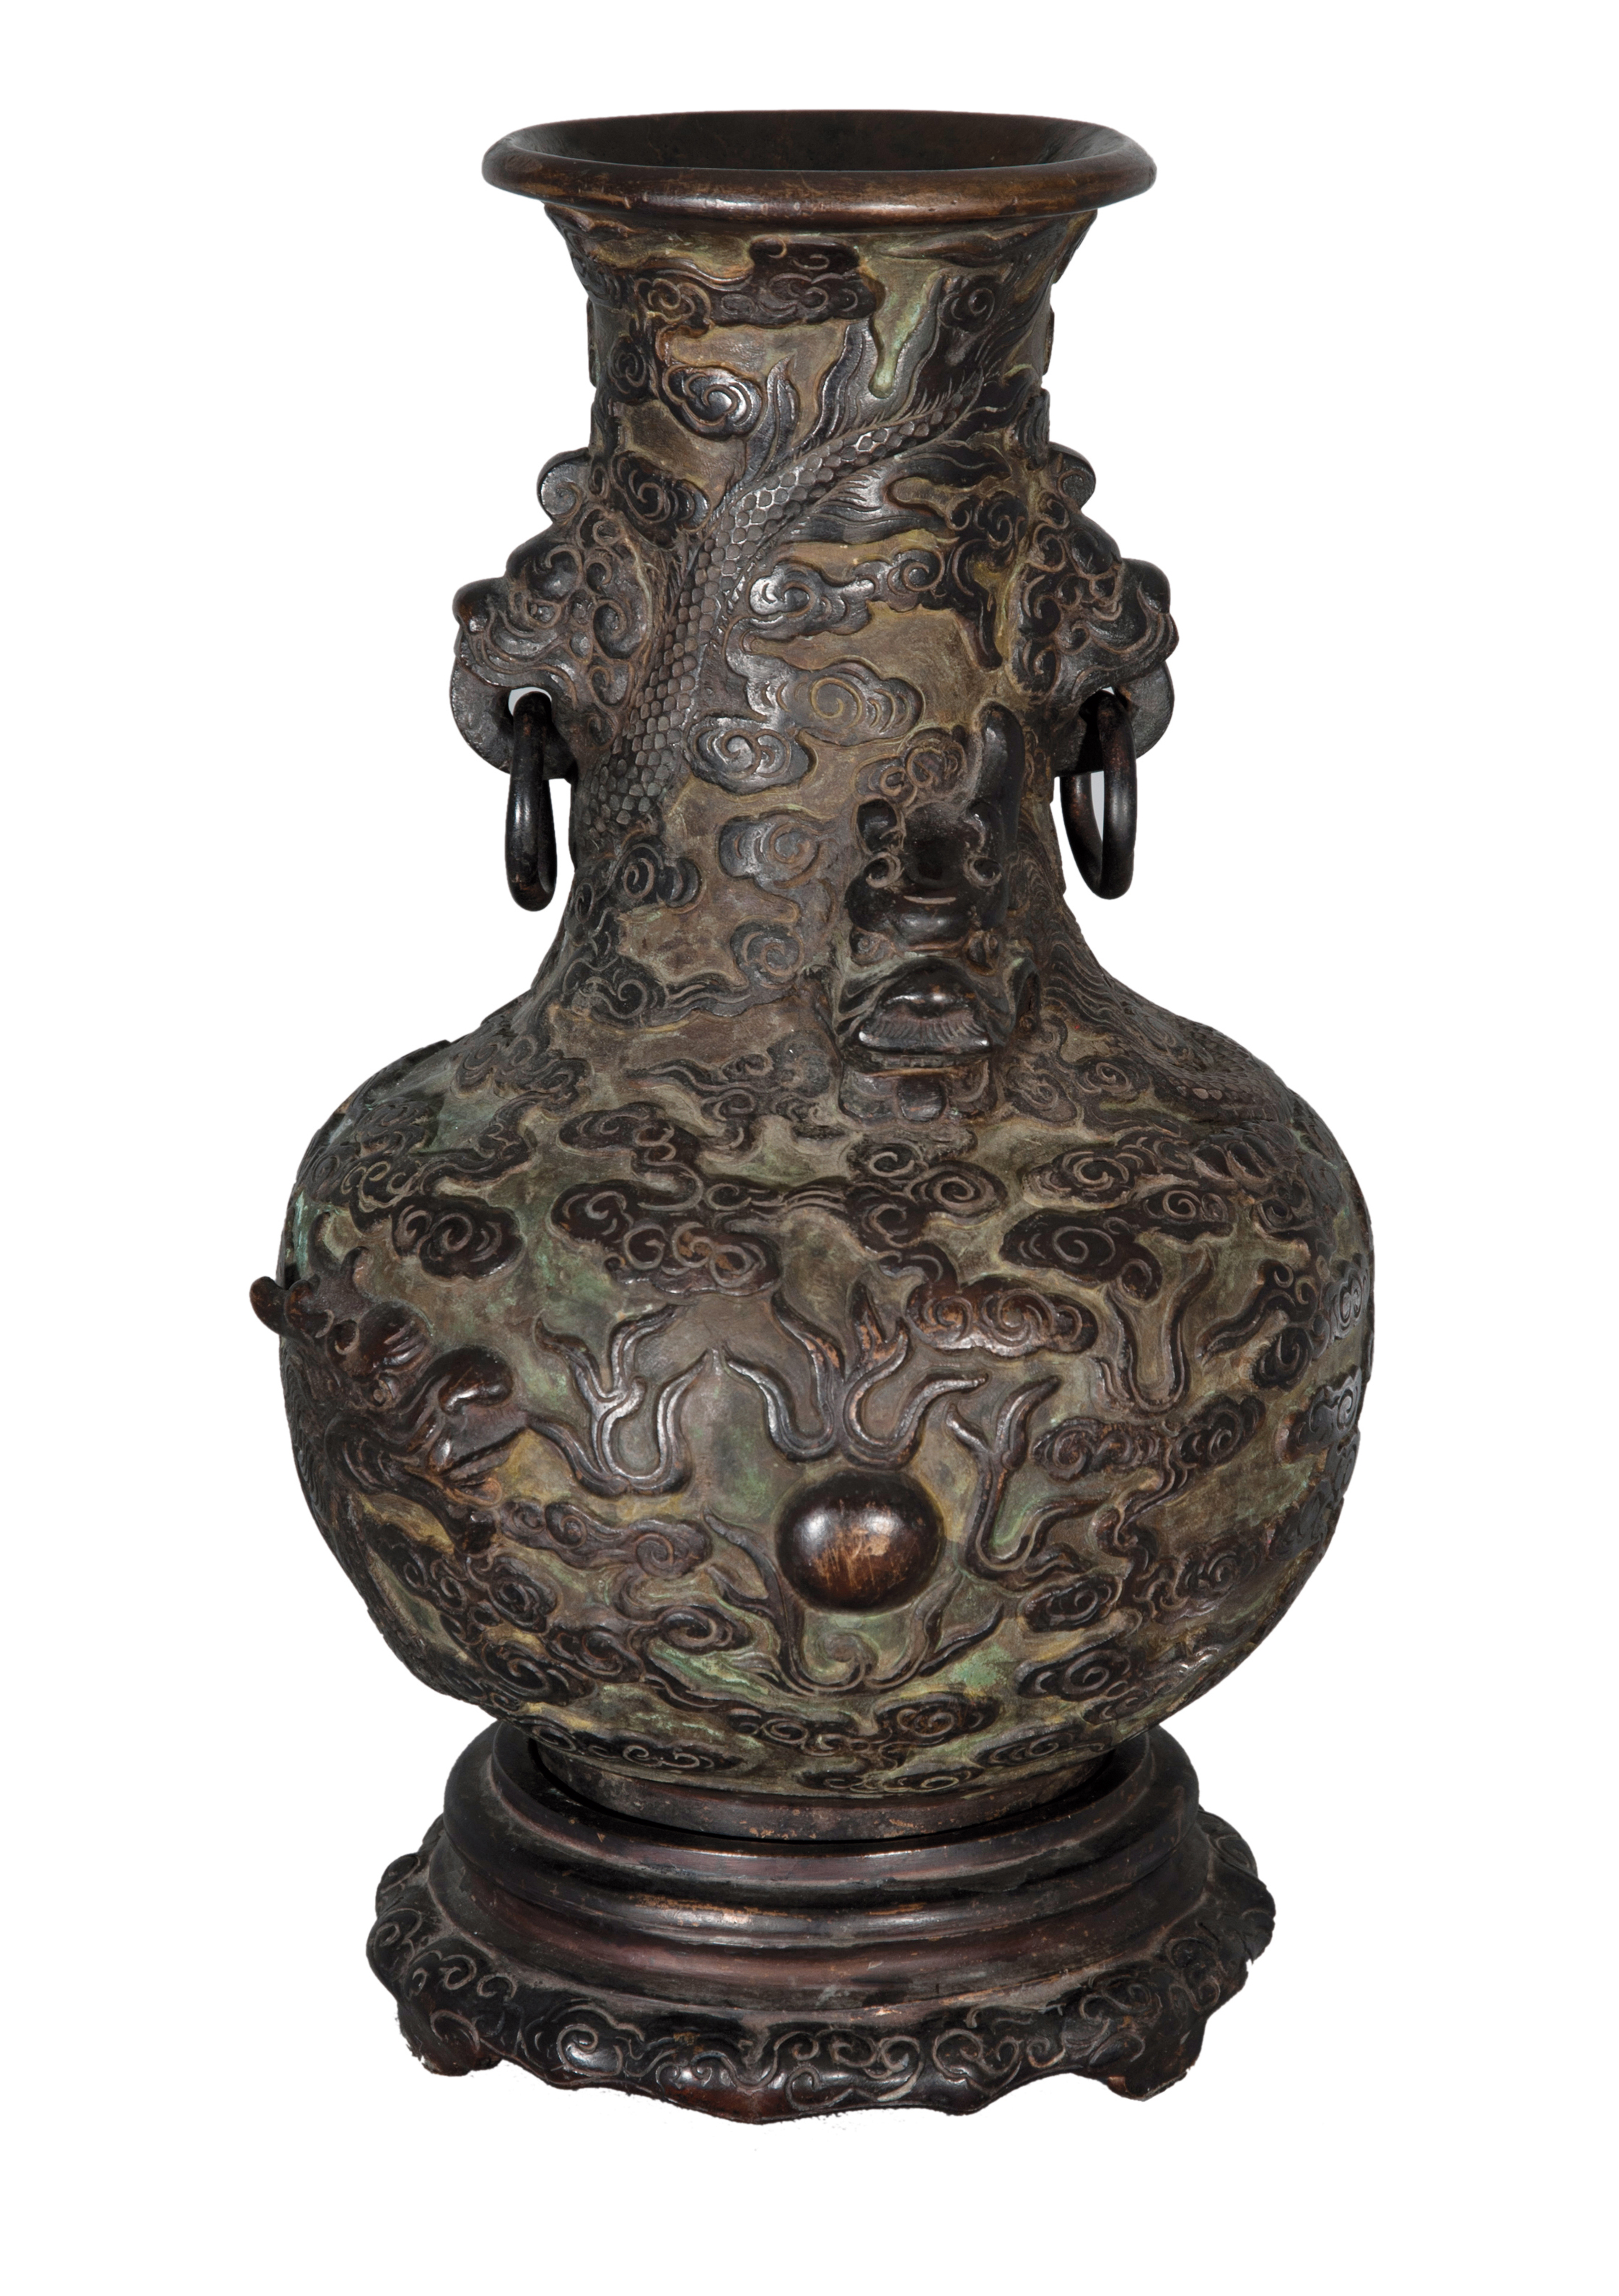 A bronze vase with dragon relief